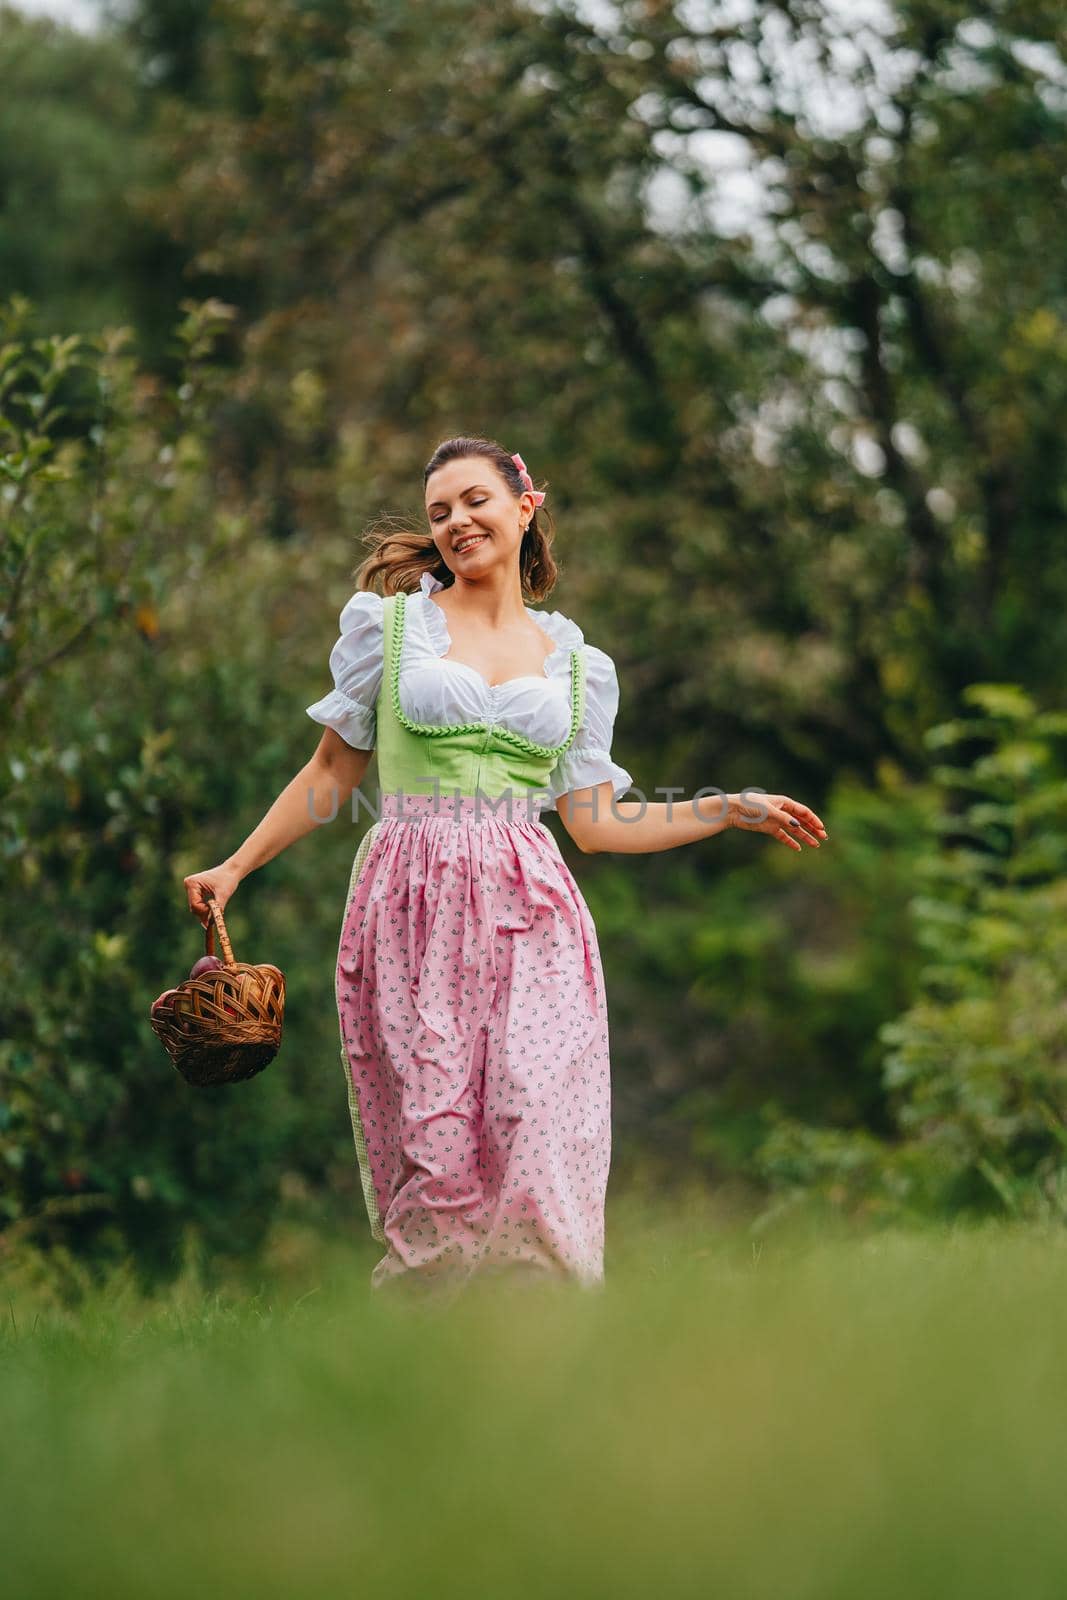 Pretty woman in dirndl - traditional festival dress running with basket in apple garden. Organic village lifestyle, agriculture, harvest, retro style concept. High quality photo